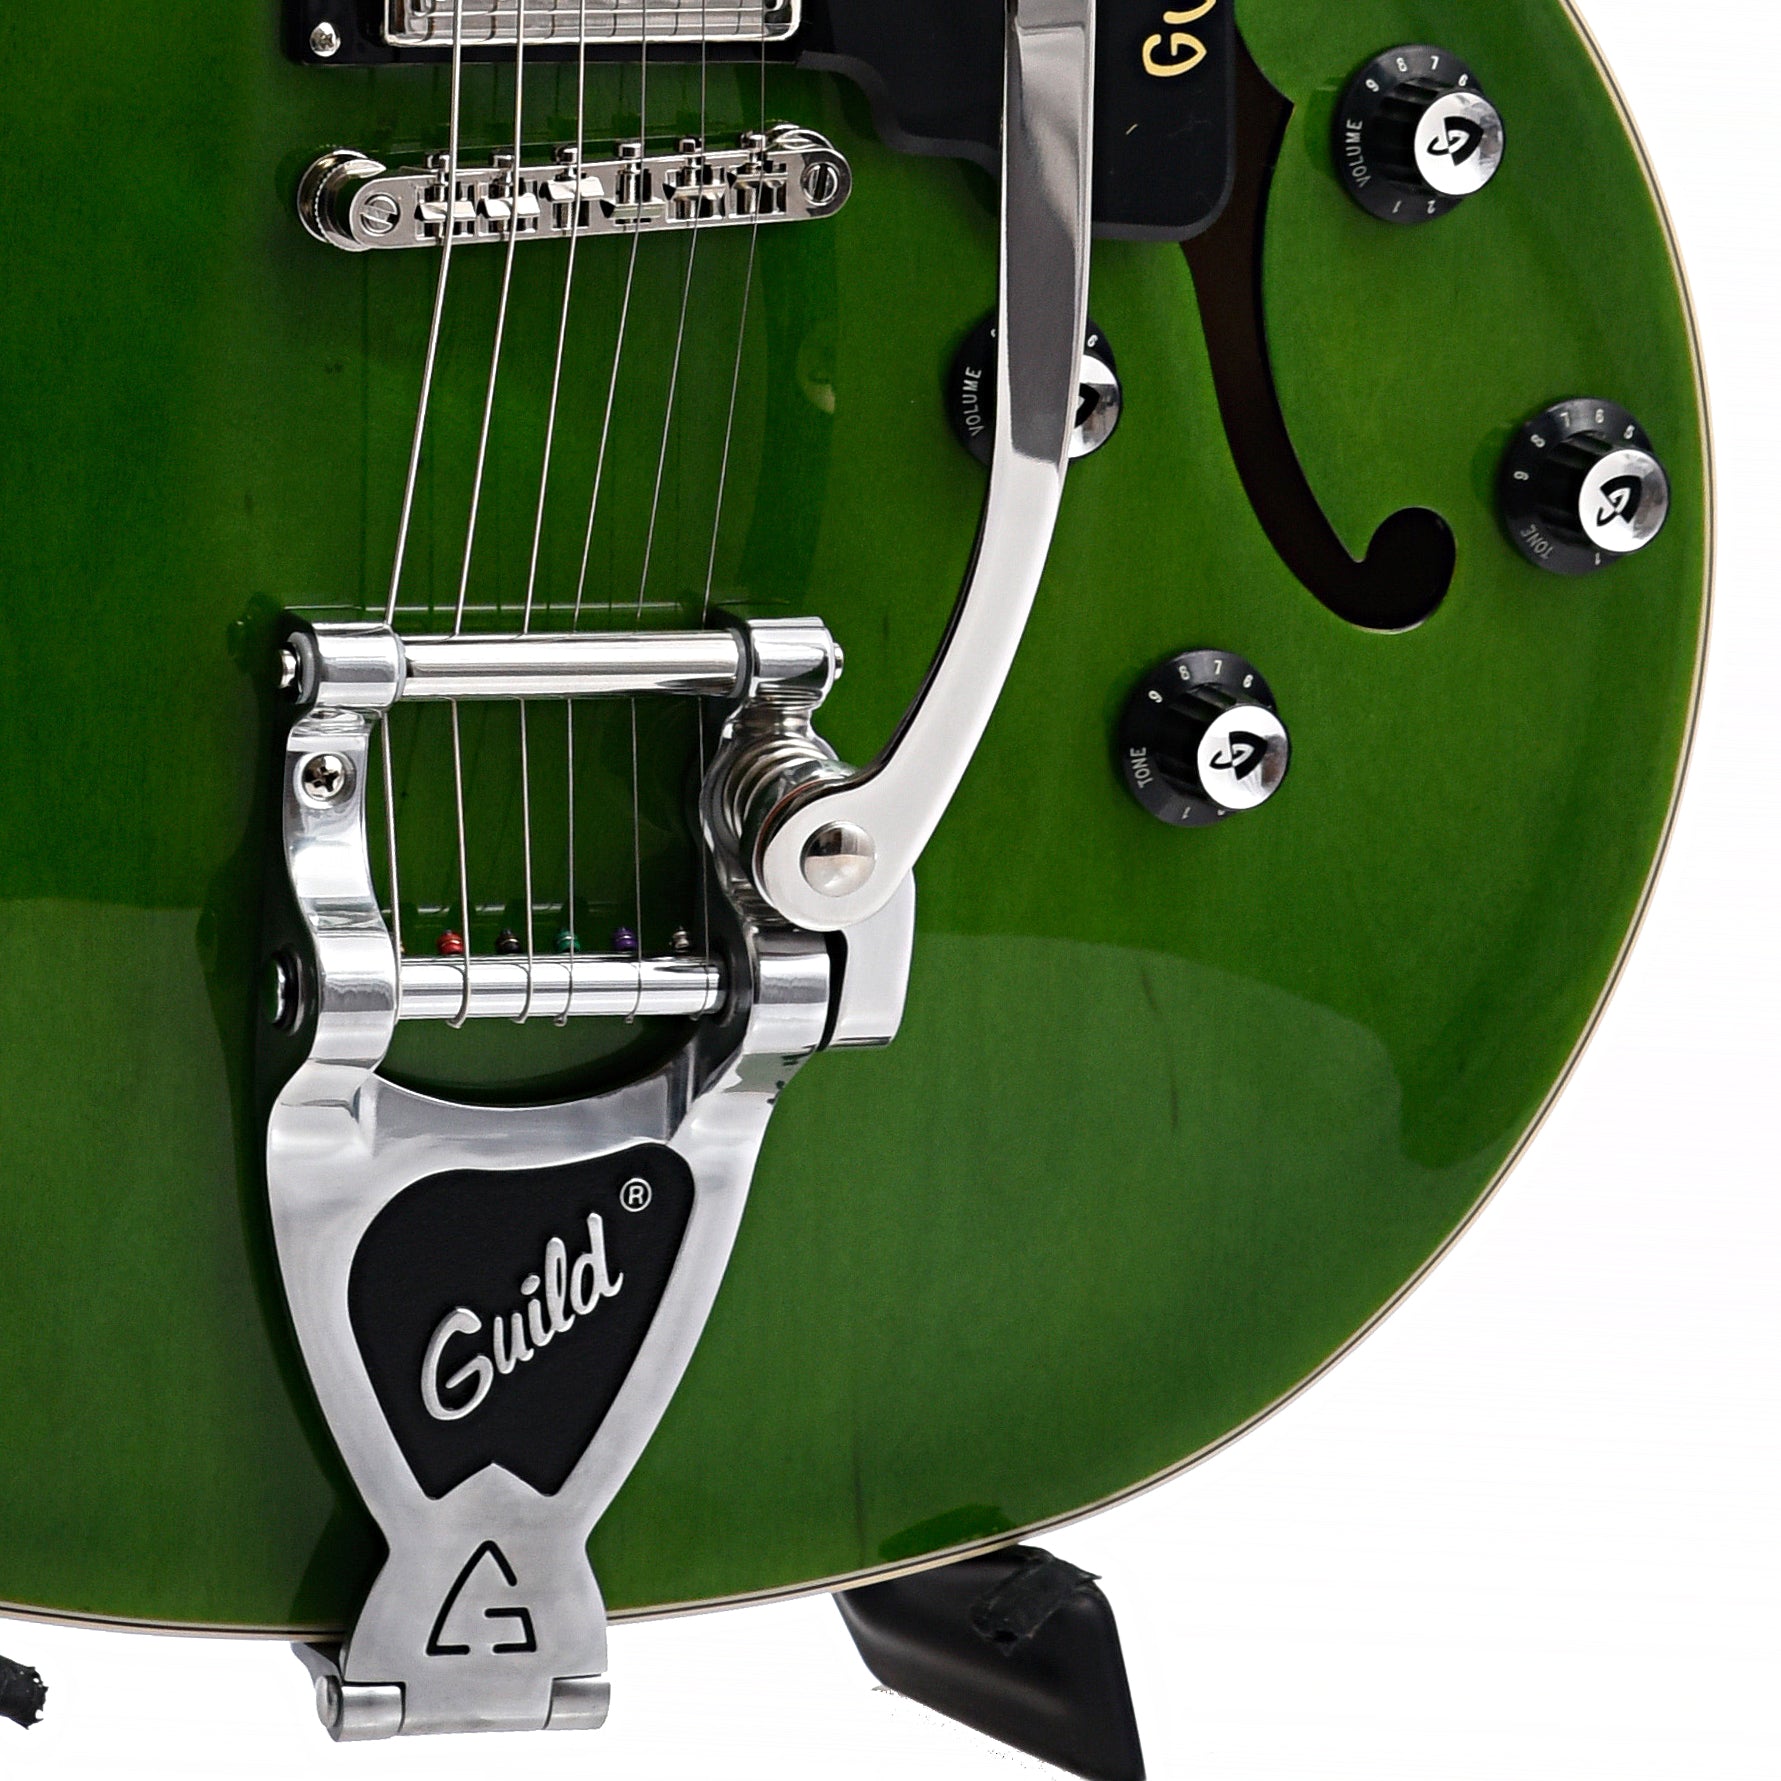 Image 3 of Guild Starfire I Double Cutaway Semi-Hollow Body Guitar with Vibrato, Emerald Green - SKU# GSF1DCV-GRN : Product Type Hollow Body Electric Guitars : Elderly Instruments